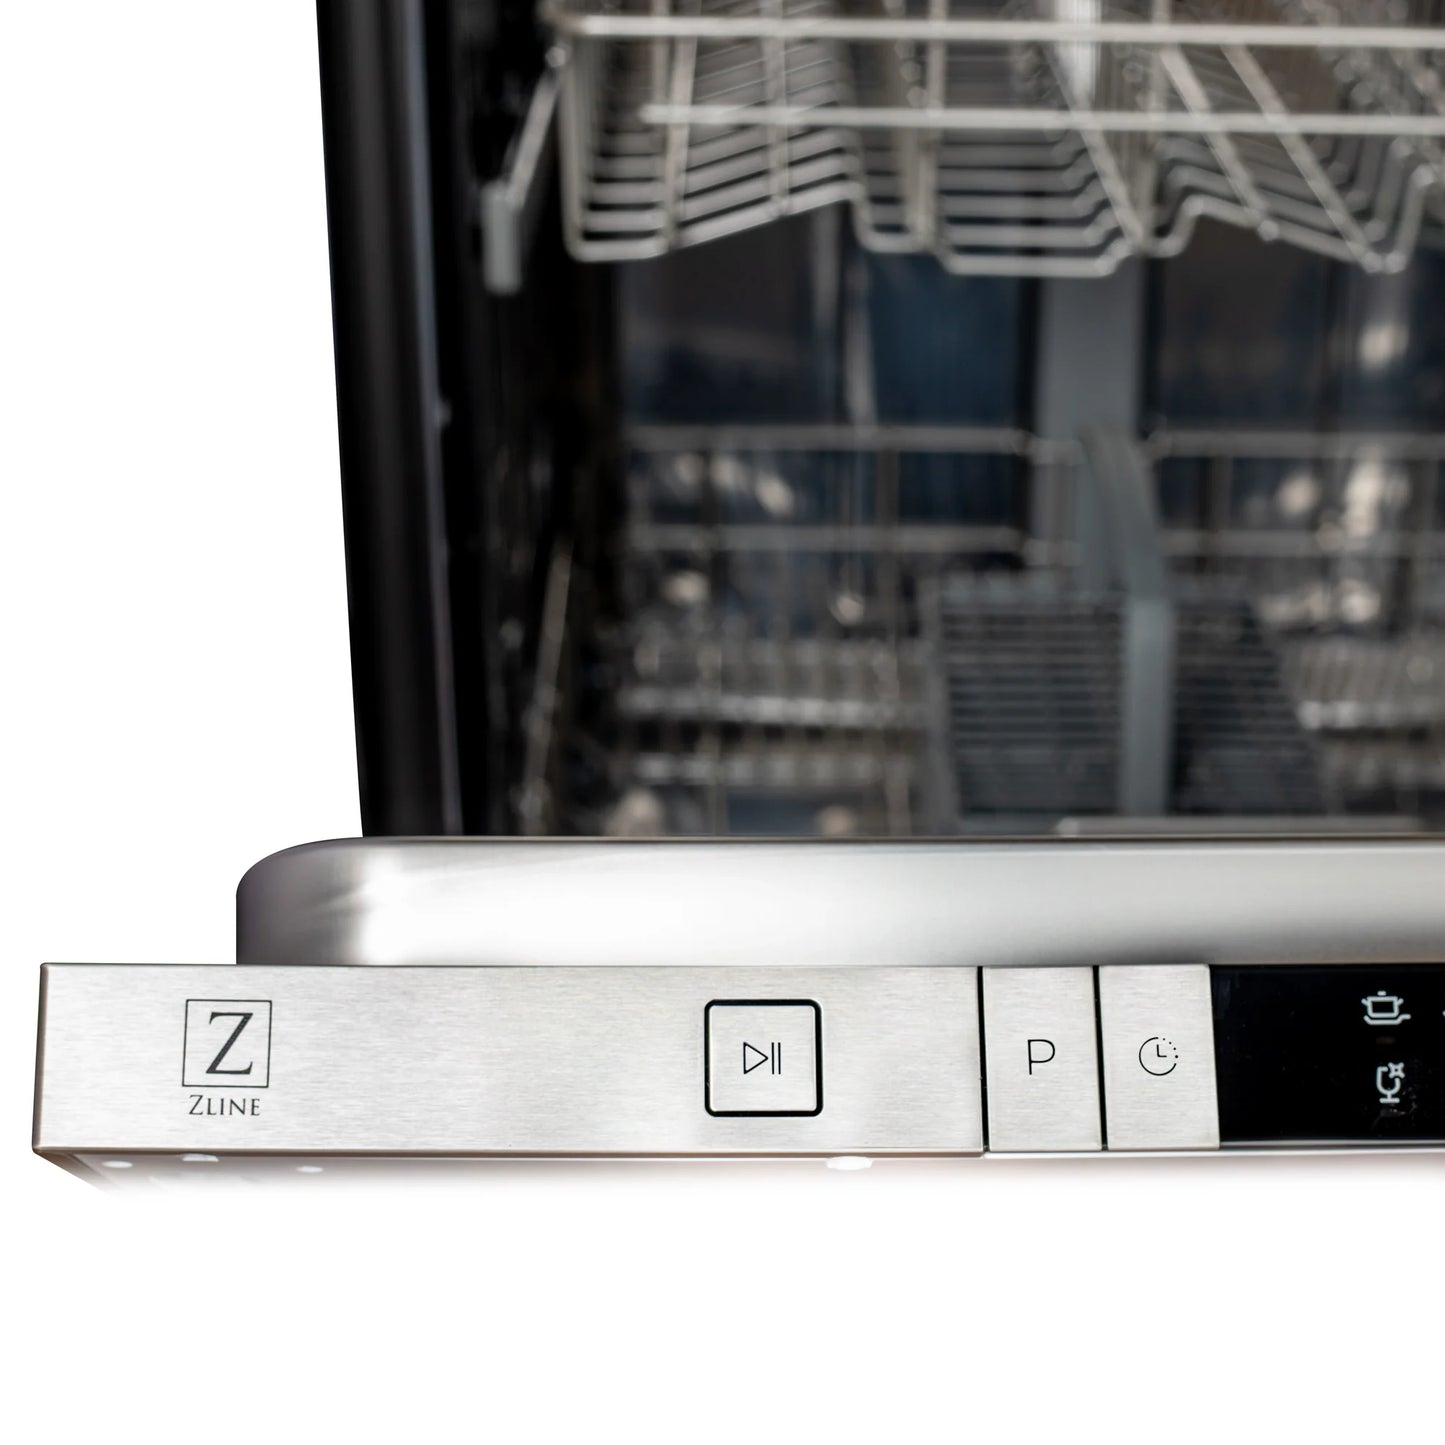 ZLINE 24 in. Compact Top Control Dishwasher with White Matte Panel and Modern Handle (DW-WM-H-24)